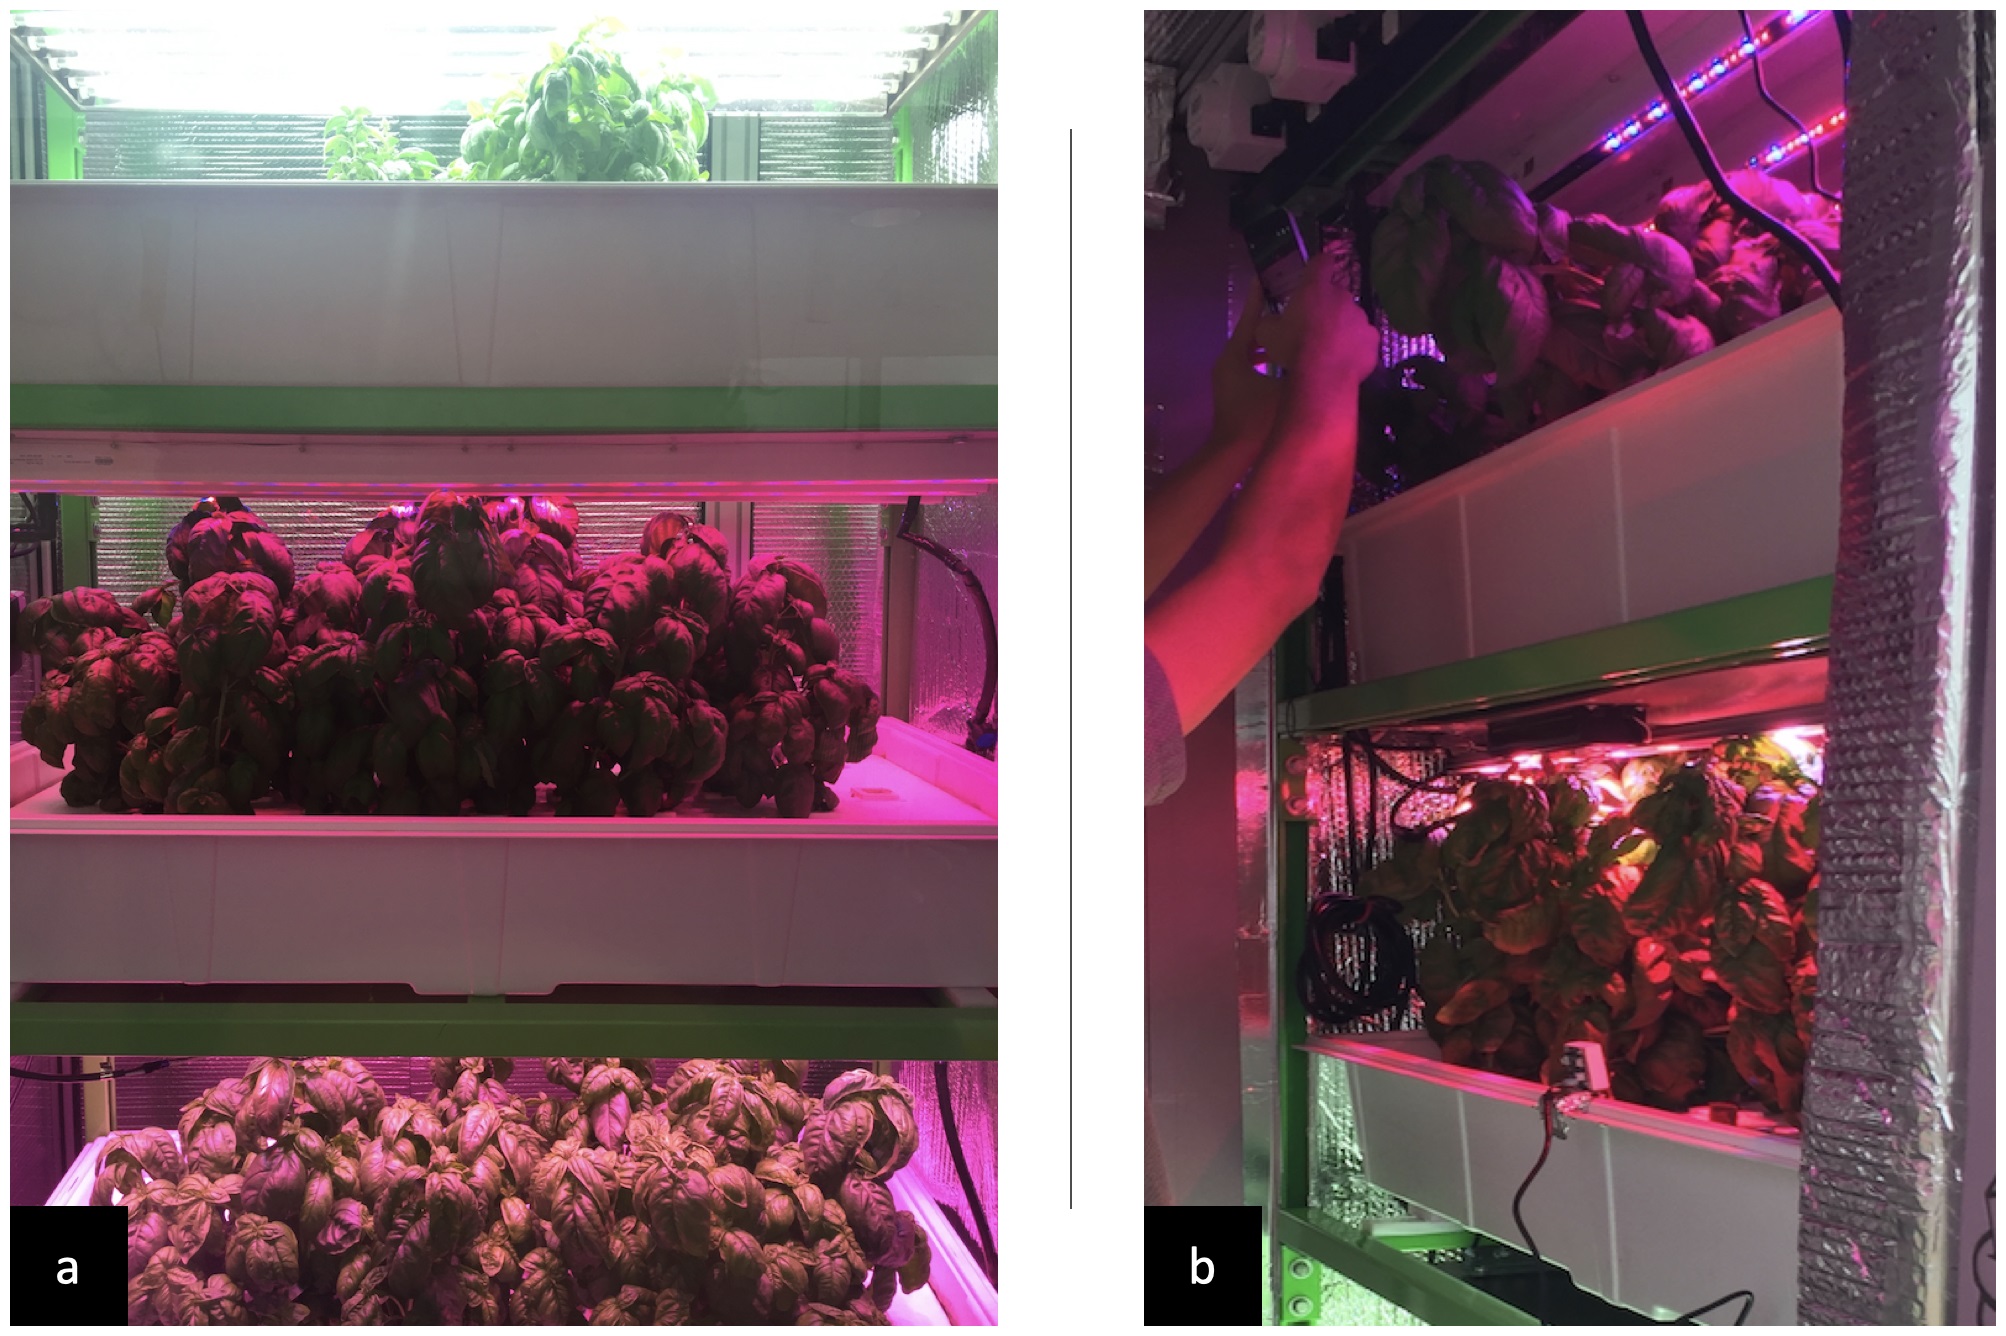 MIT’s ‘cyber-agriculture’ optimizes basil flavors